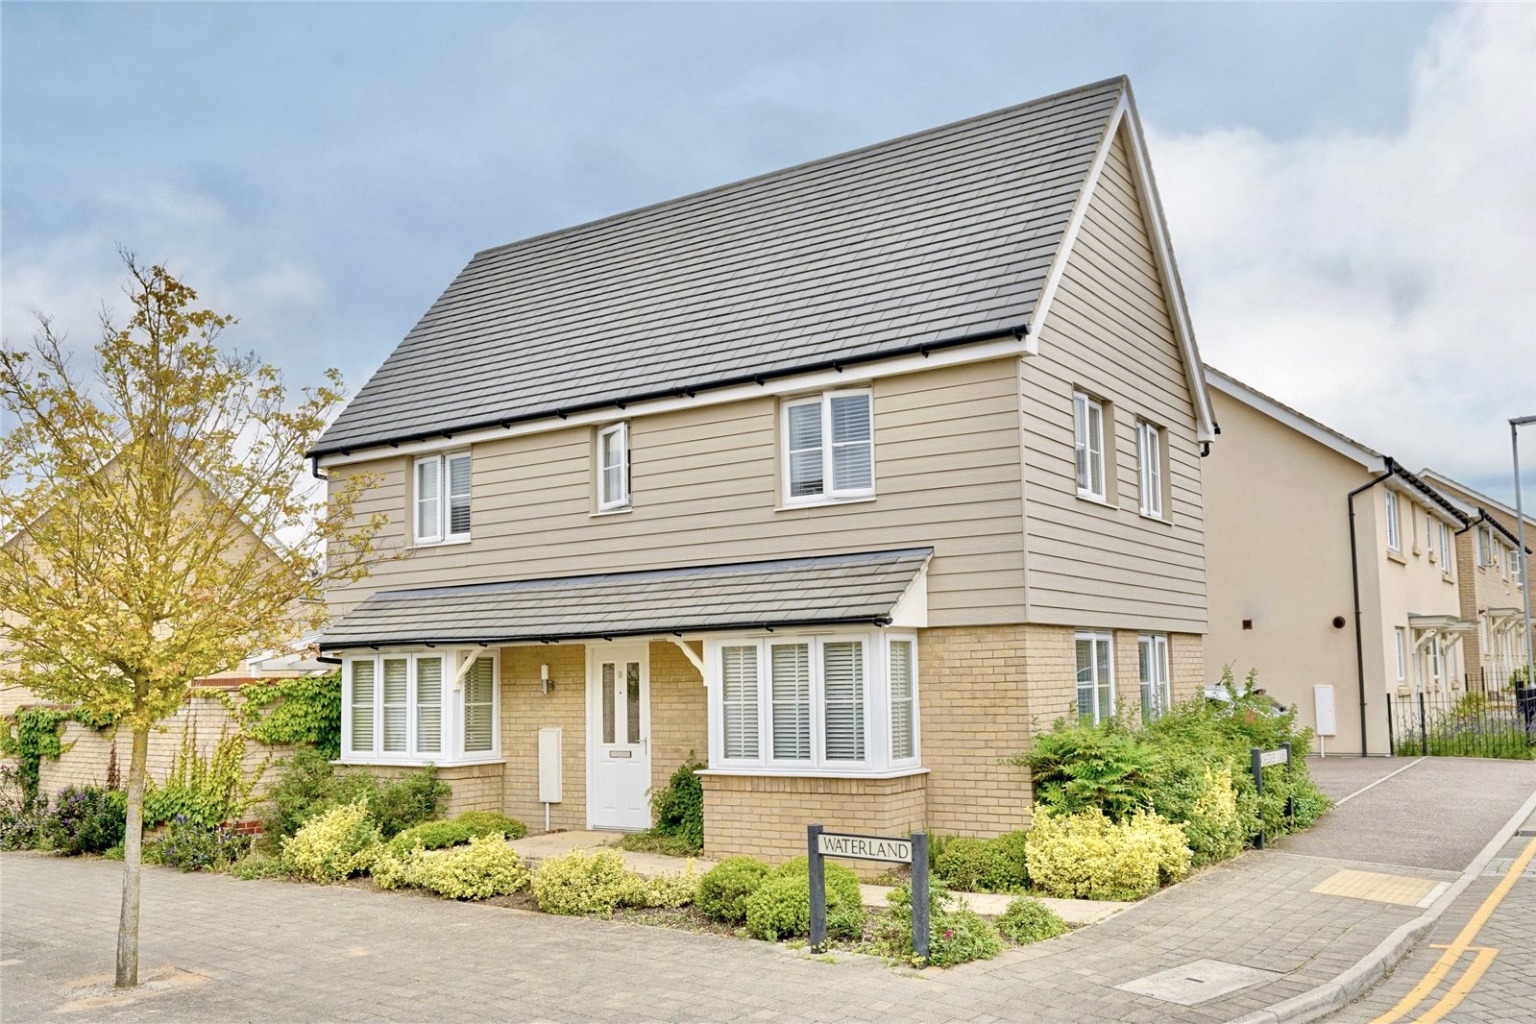 3 bed detached house for sale in Waterland, St. Neots  - Property Image 1